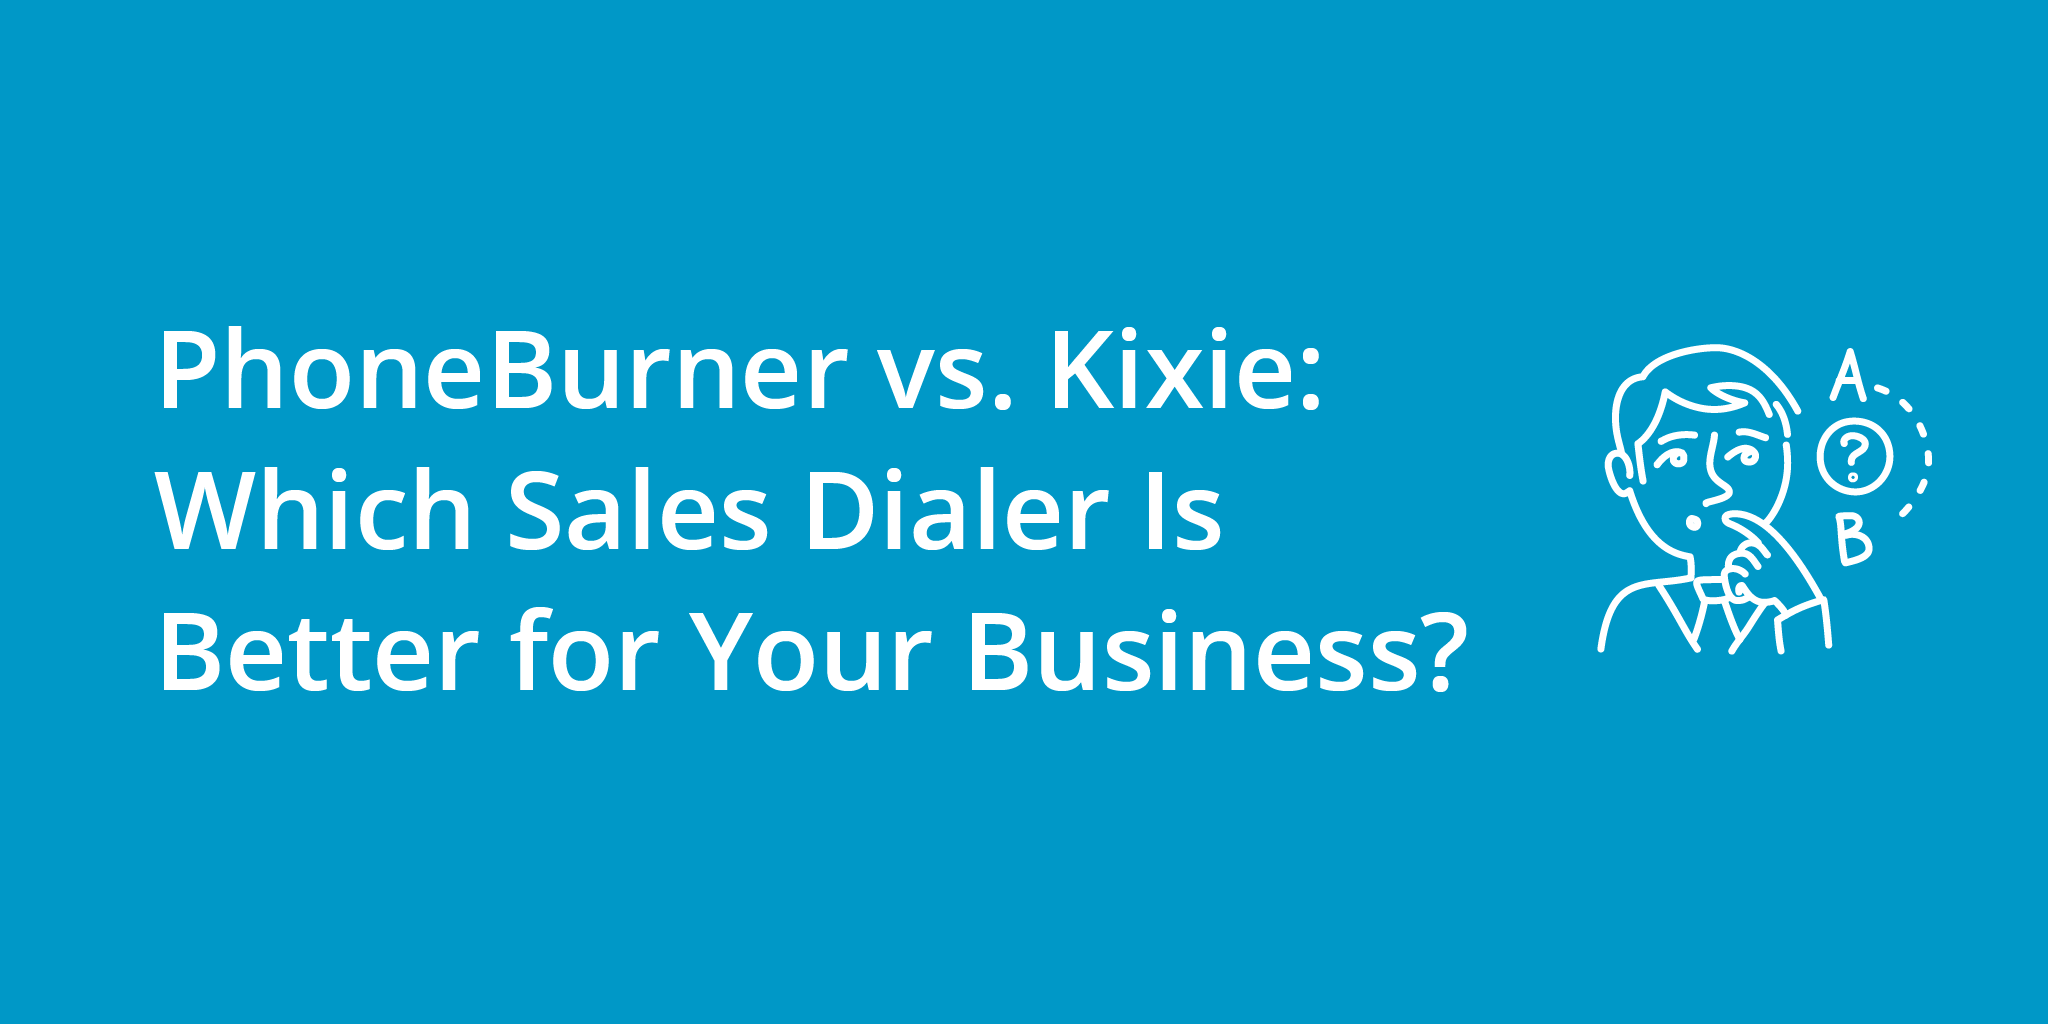 PhoneBurner vs. Kixie: Which Sales Dialer Is Better for Your Business? | Telephones for business